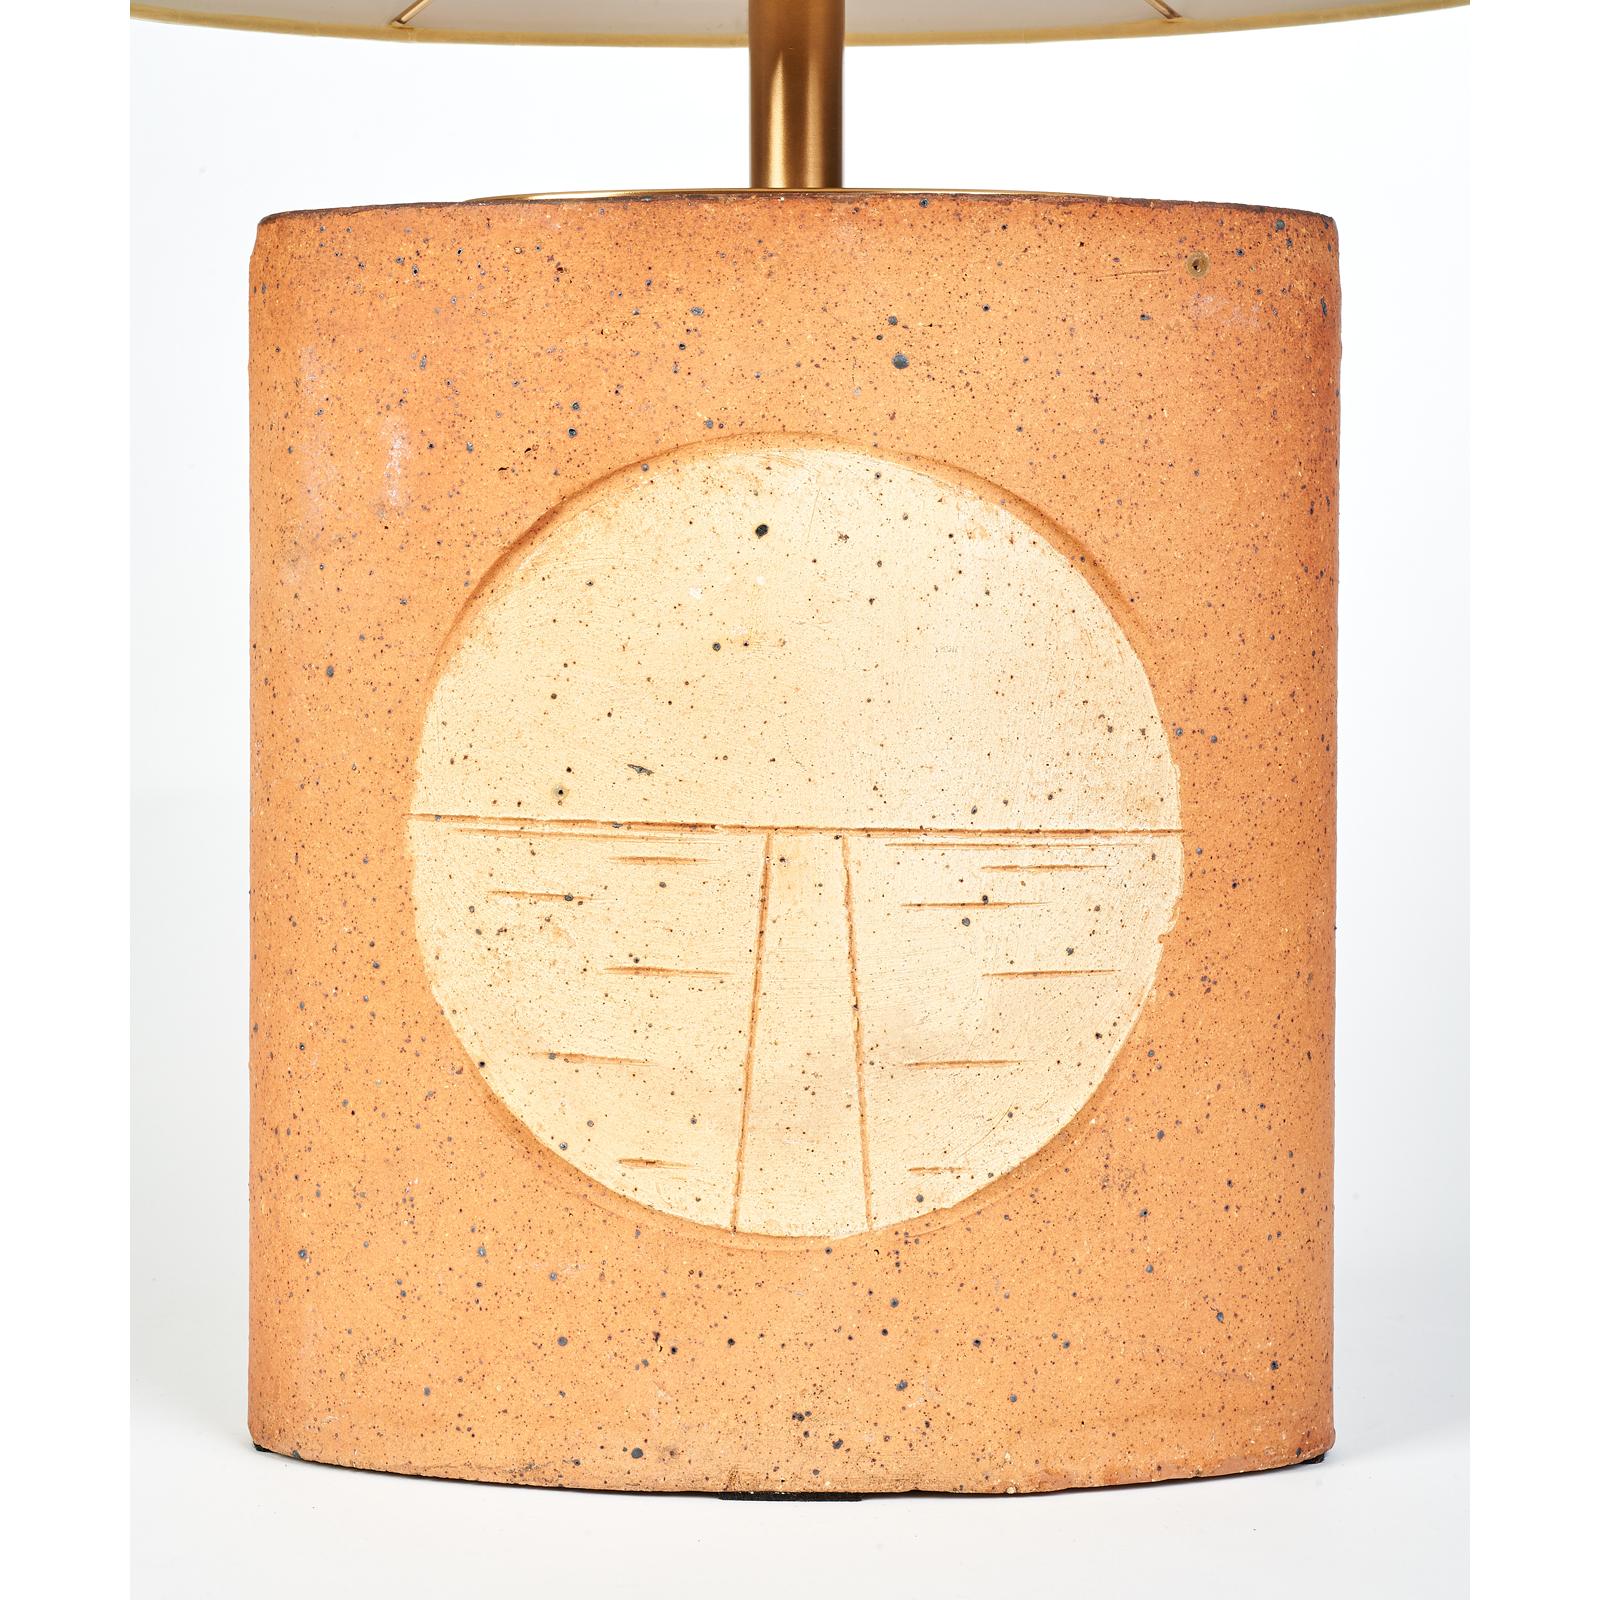 Late 20th Century Two Oval Ceramic Lamps with Incised Geometric Motif, France, 1970s For Sale